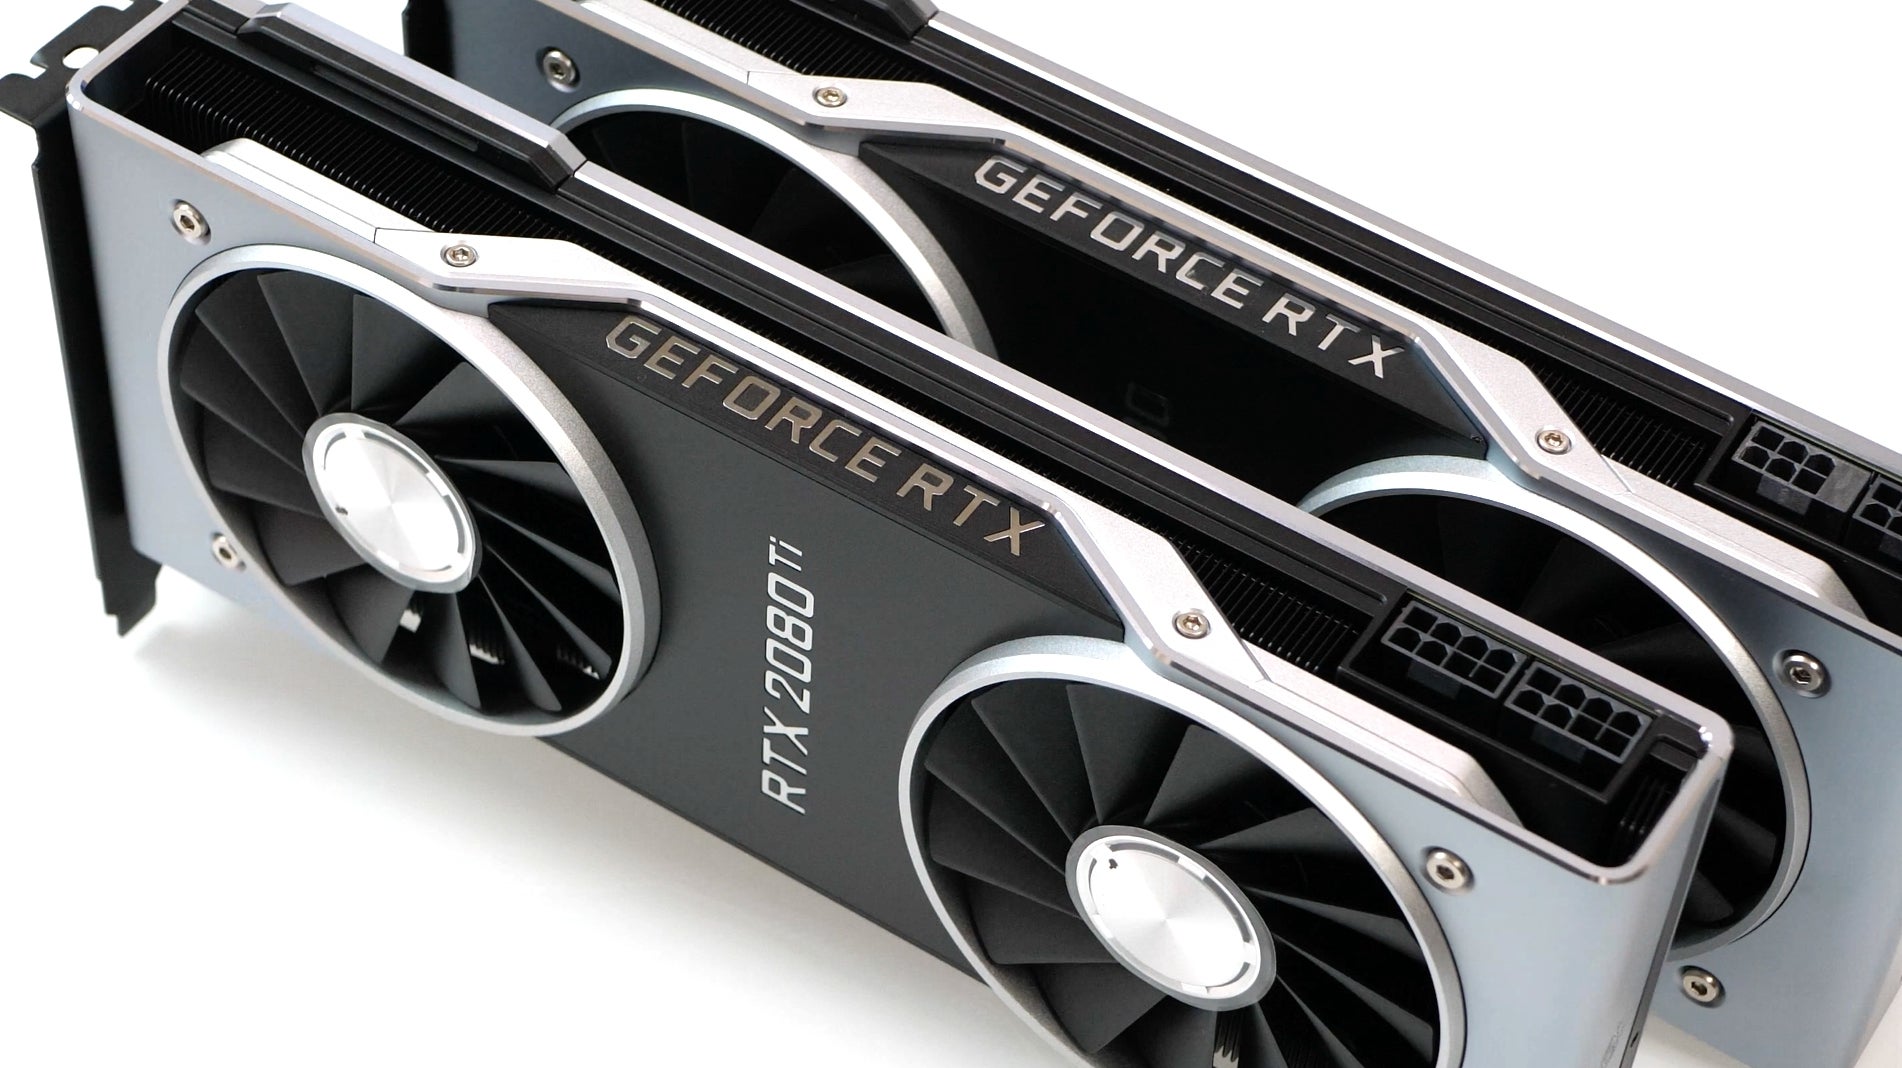 GeForce RTX and 2080 Ti our first glimpse of next-gen | Eurogamer.net